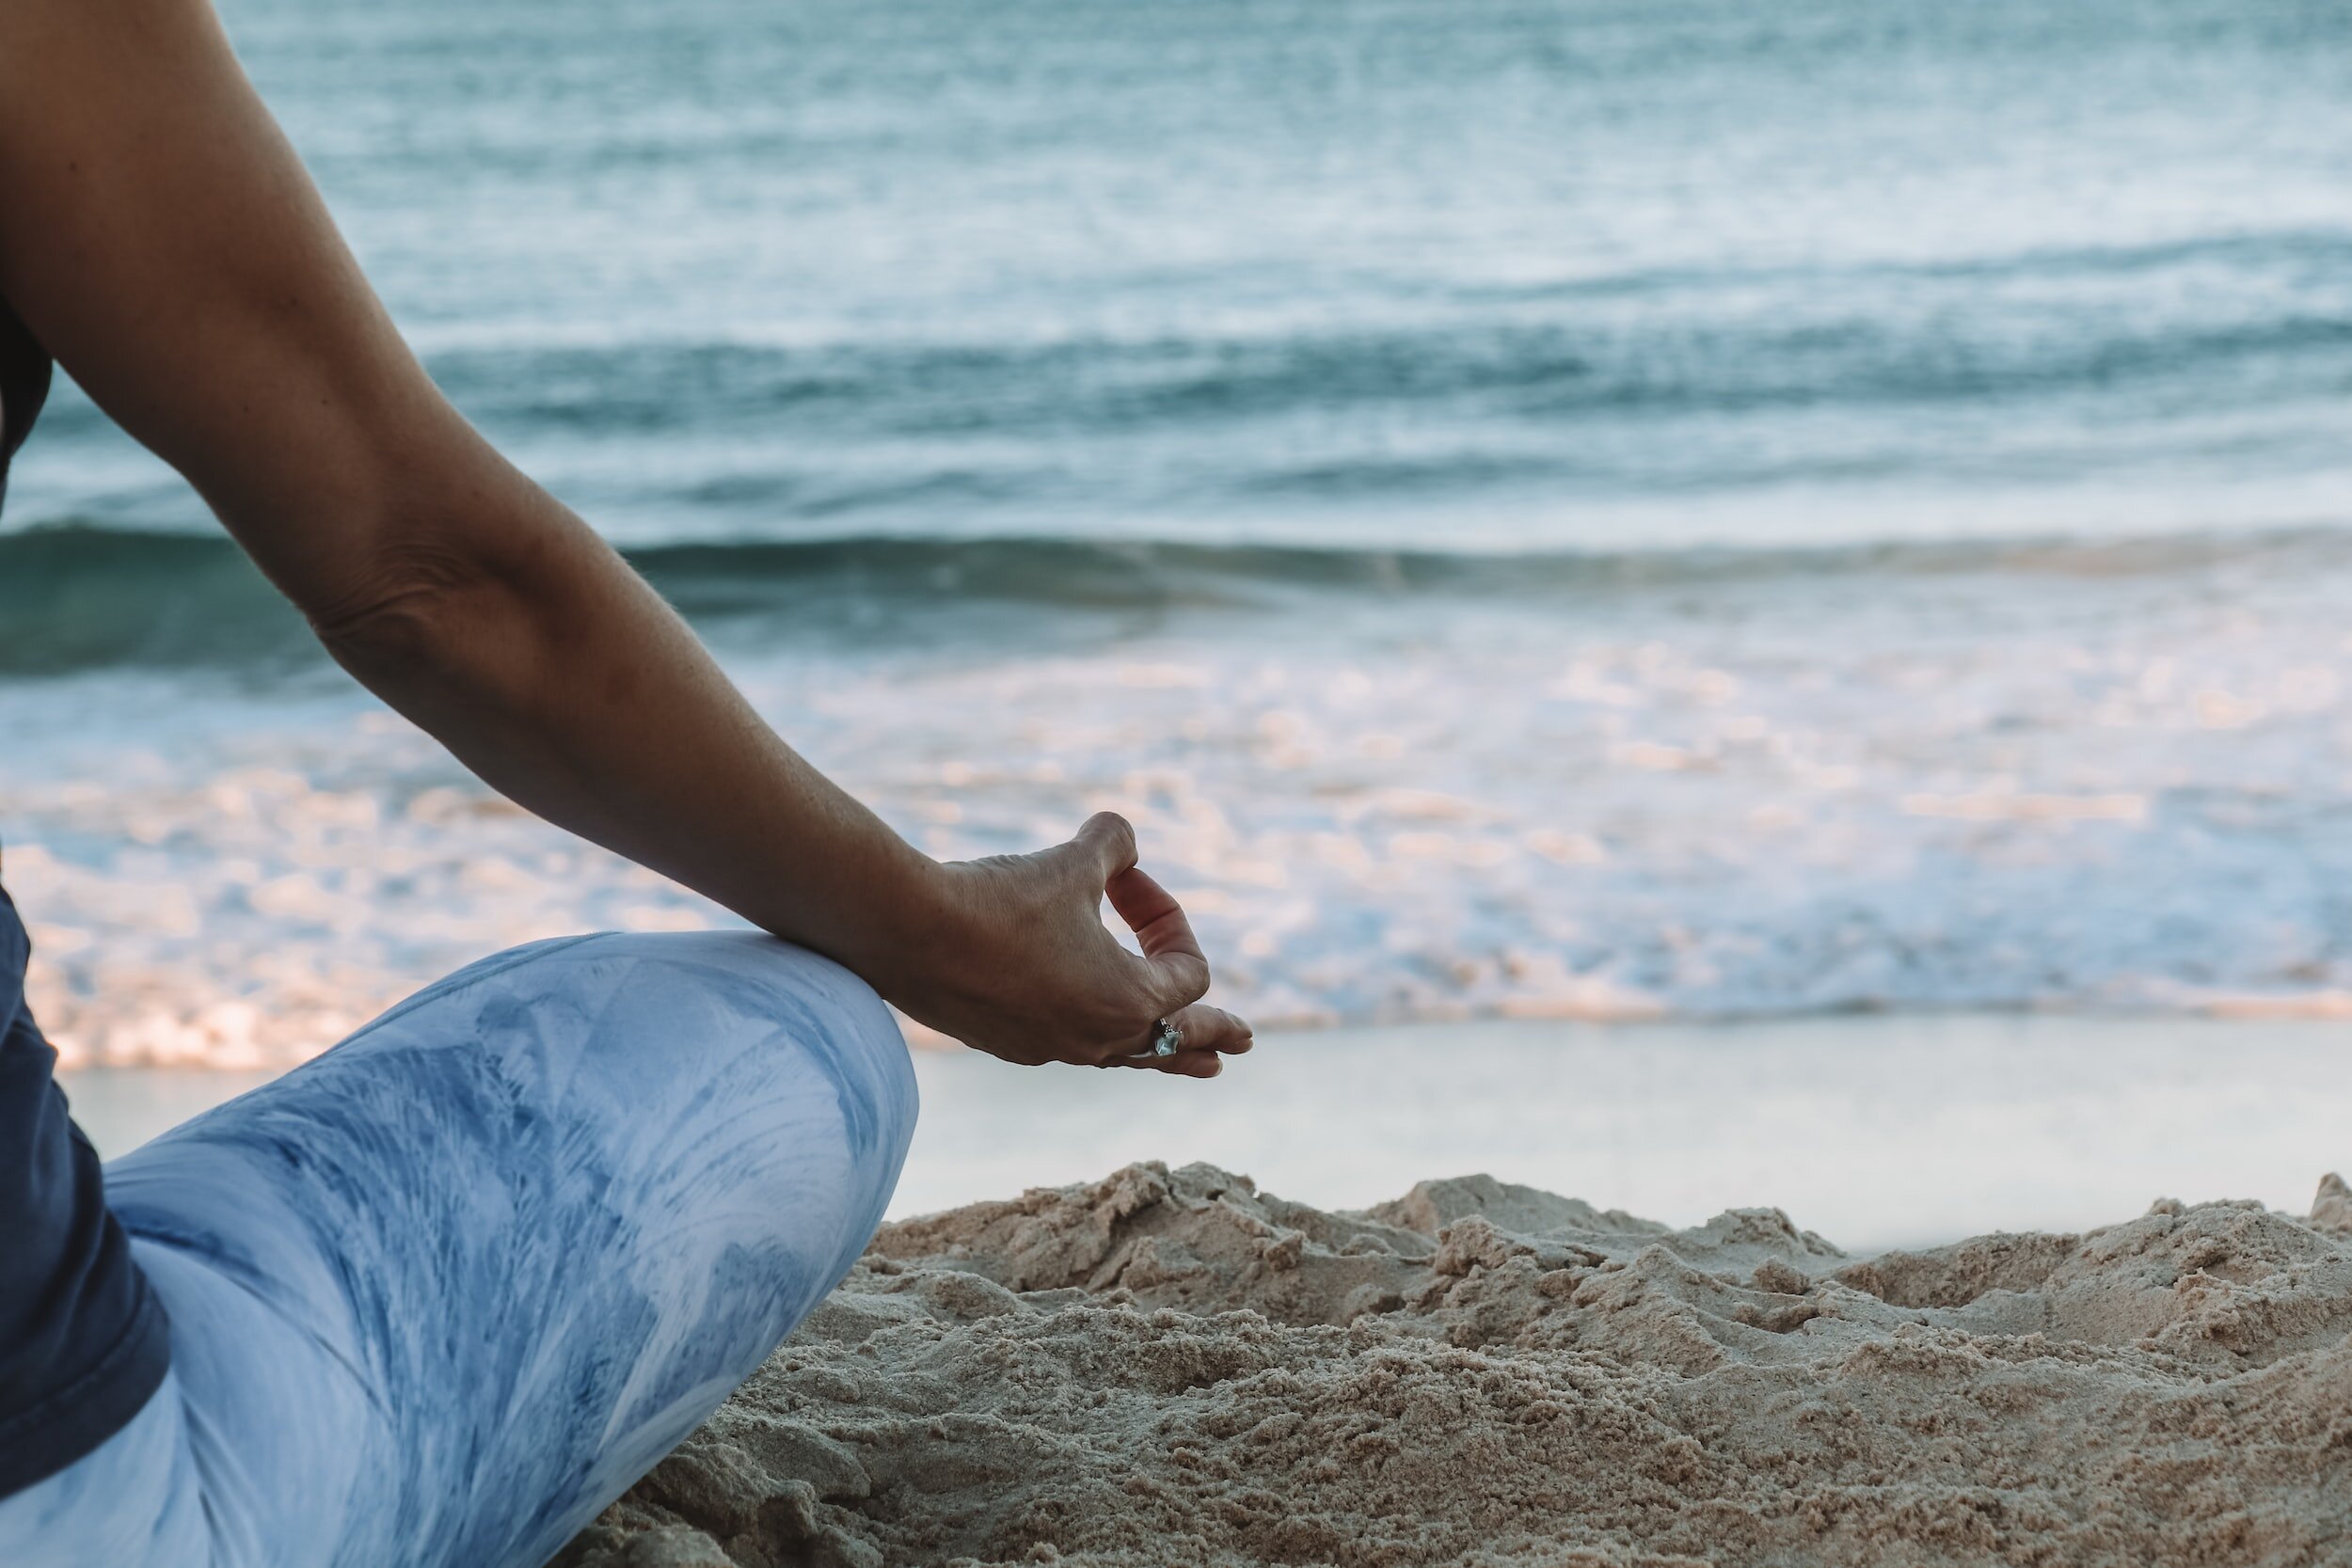 6 Ocean-themed Yoga poses to find your inner calm